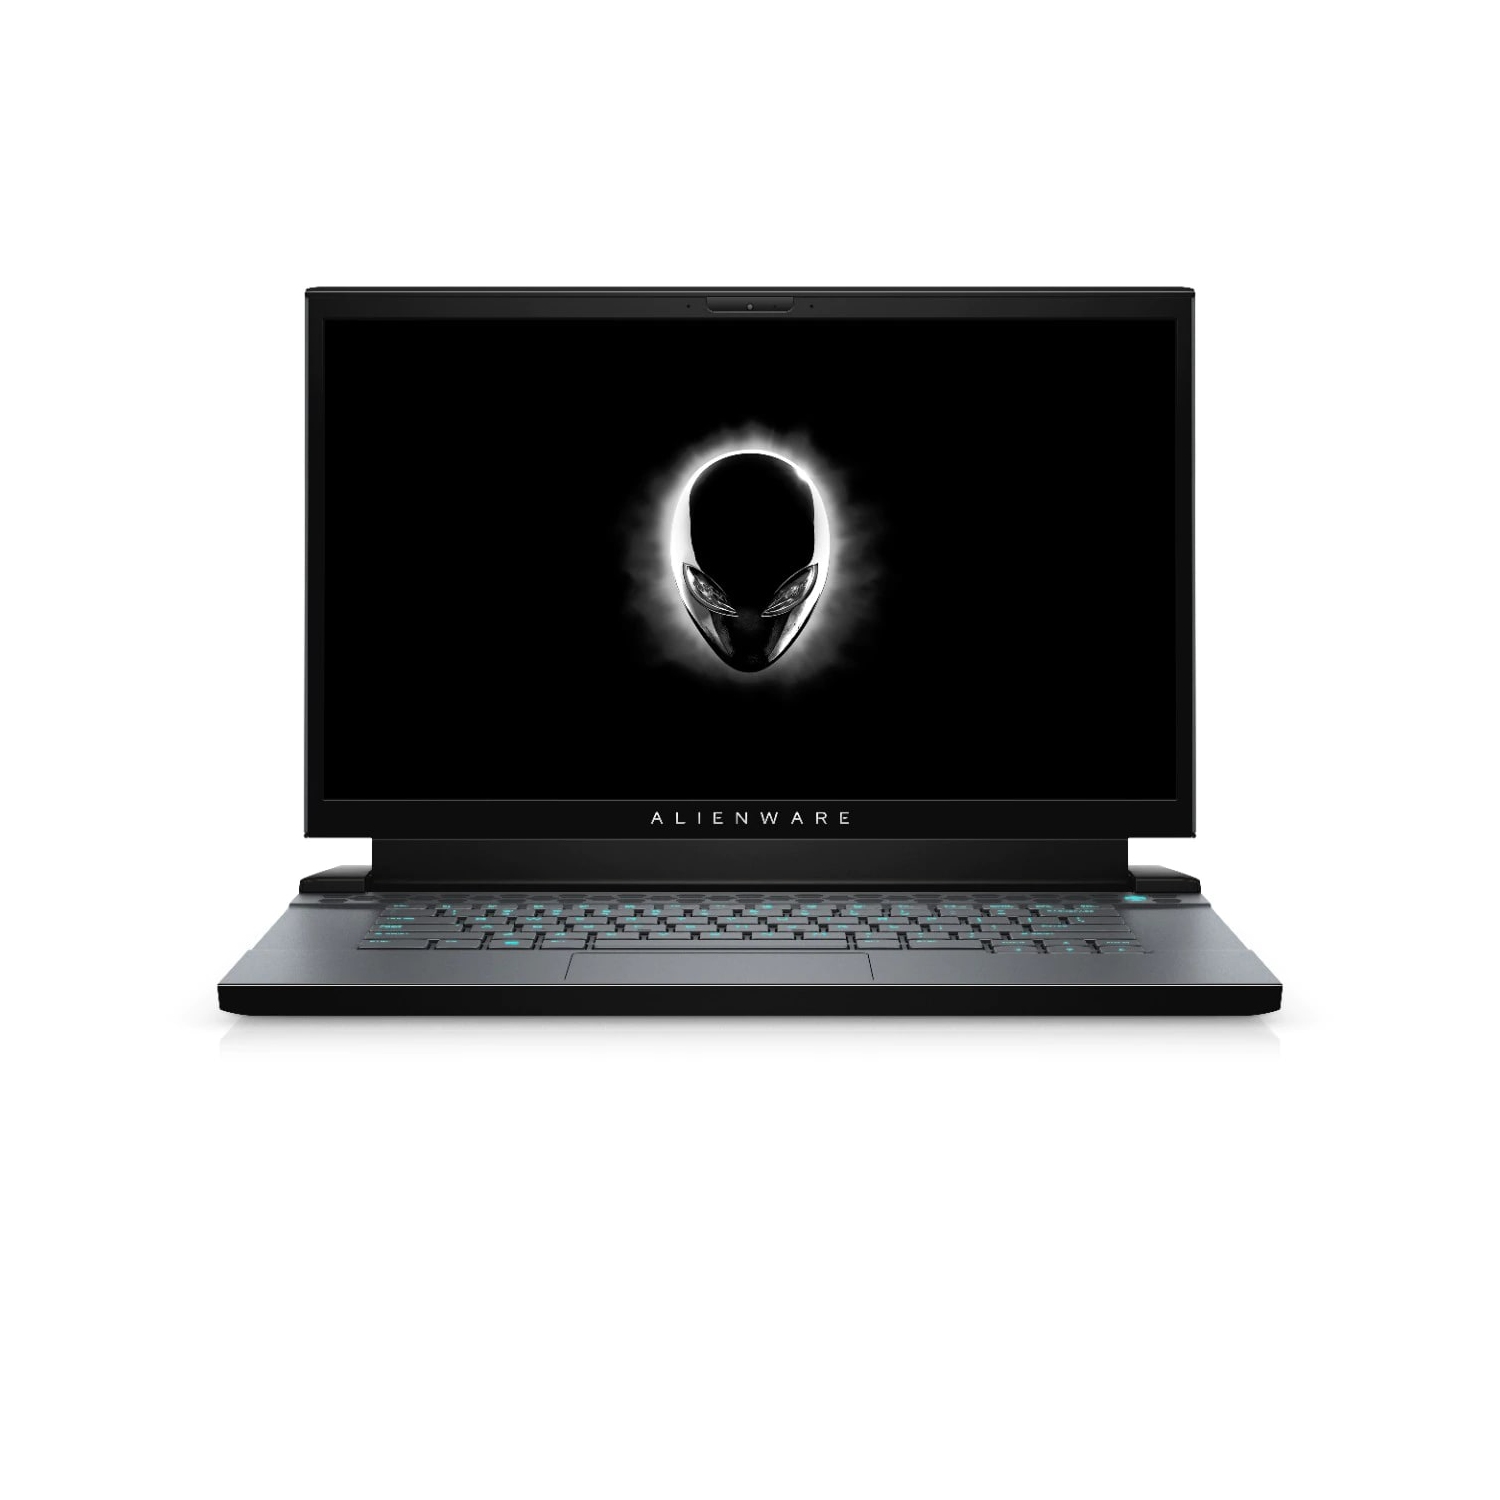 Refurbished (Excellent) - Dell Alienware m15 R2 Gaming Laptop (2019) | 15.6" FHD | Core i5 - 256GB SSD - 8GB RAM - 1660 Ti | 4 Cores @ 4.1 GHz Certified Refurbished